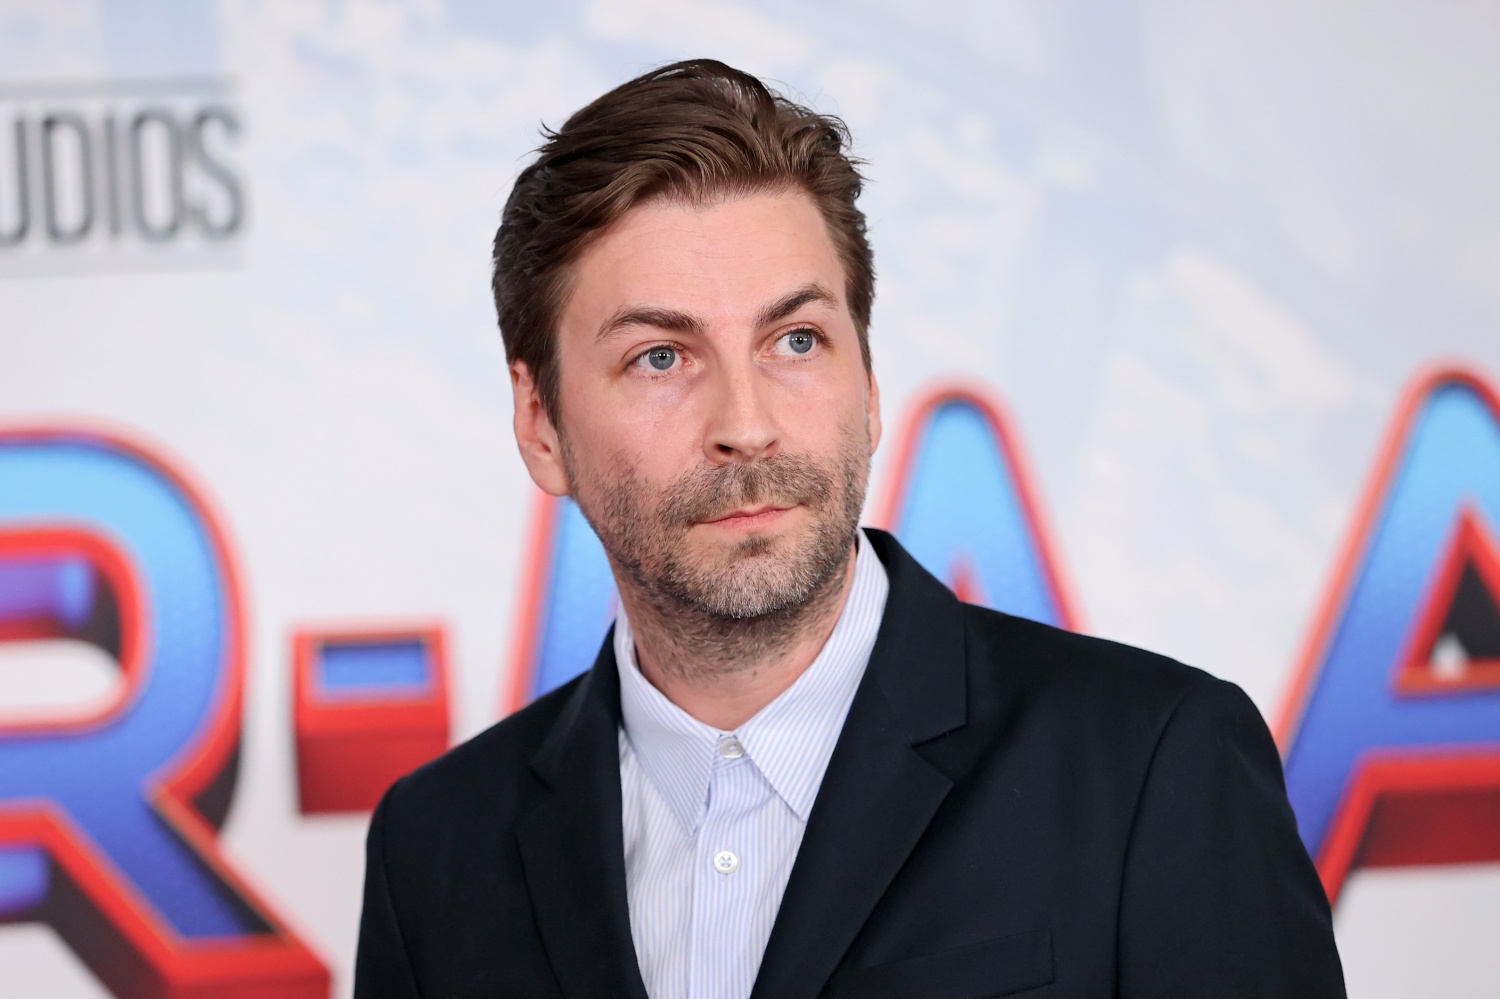 Jon Watts attends Sony Pictures' "Spider-Man: No Way Home" Los Angeles Premiere on December 13, 2021 in Los Angeles, California. (Photo by Emma McIntyre/Getty Images)